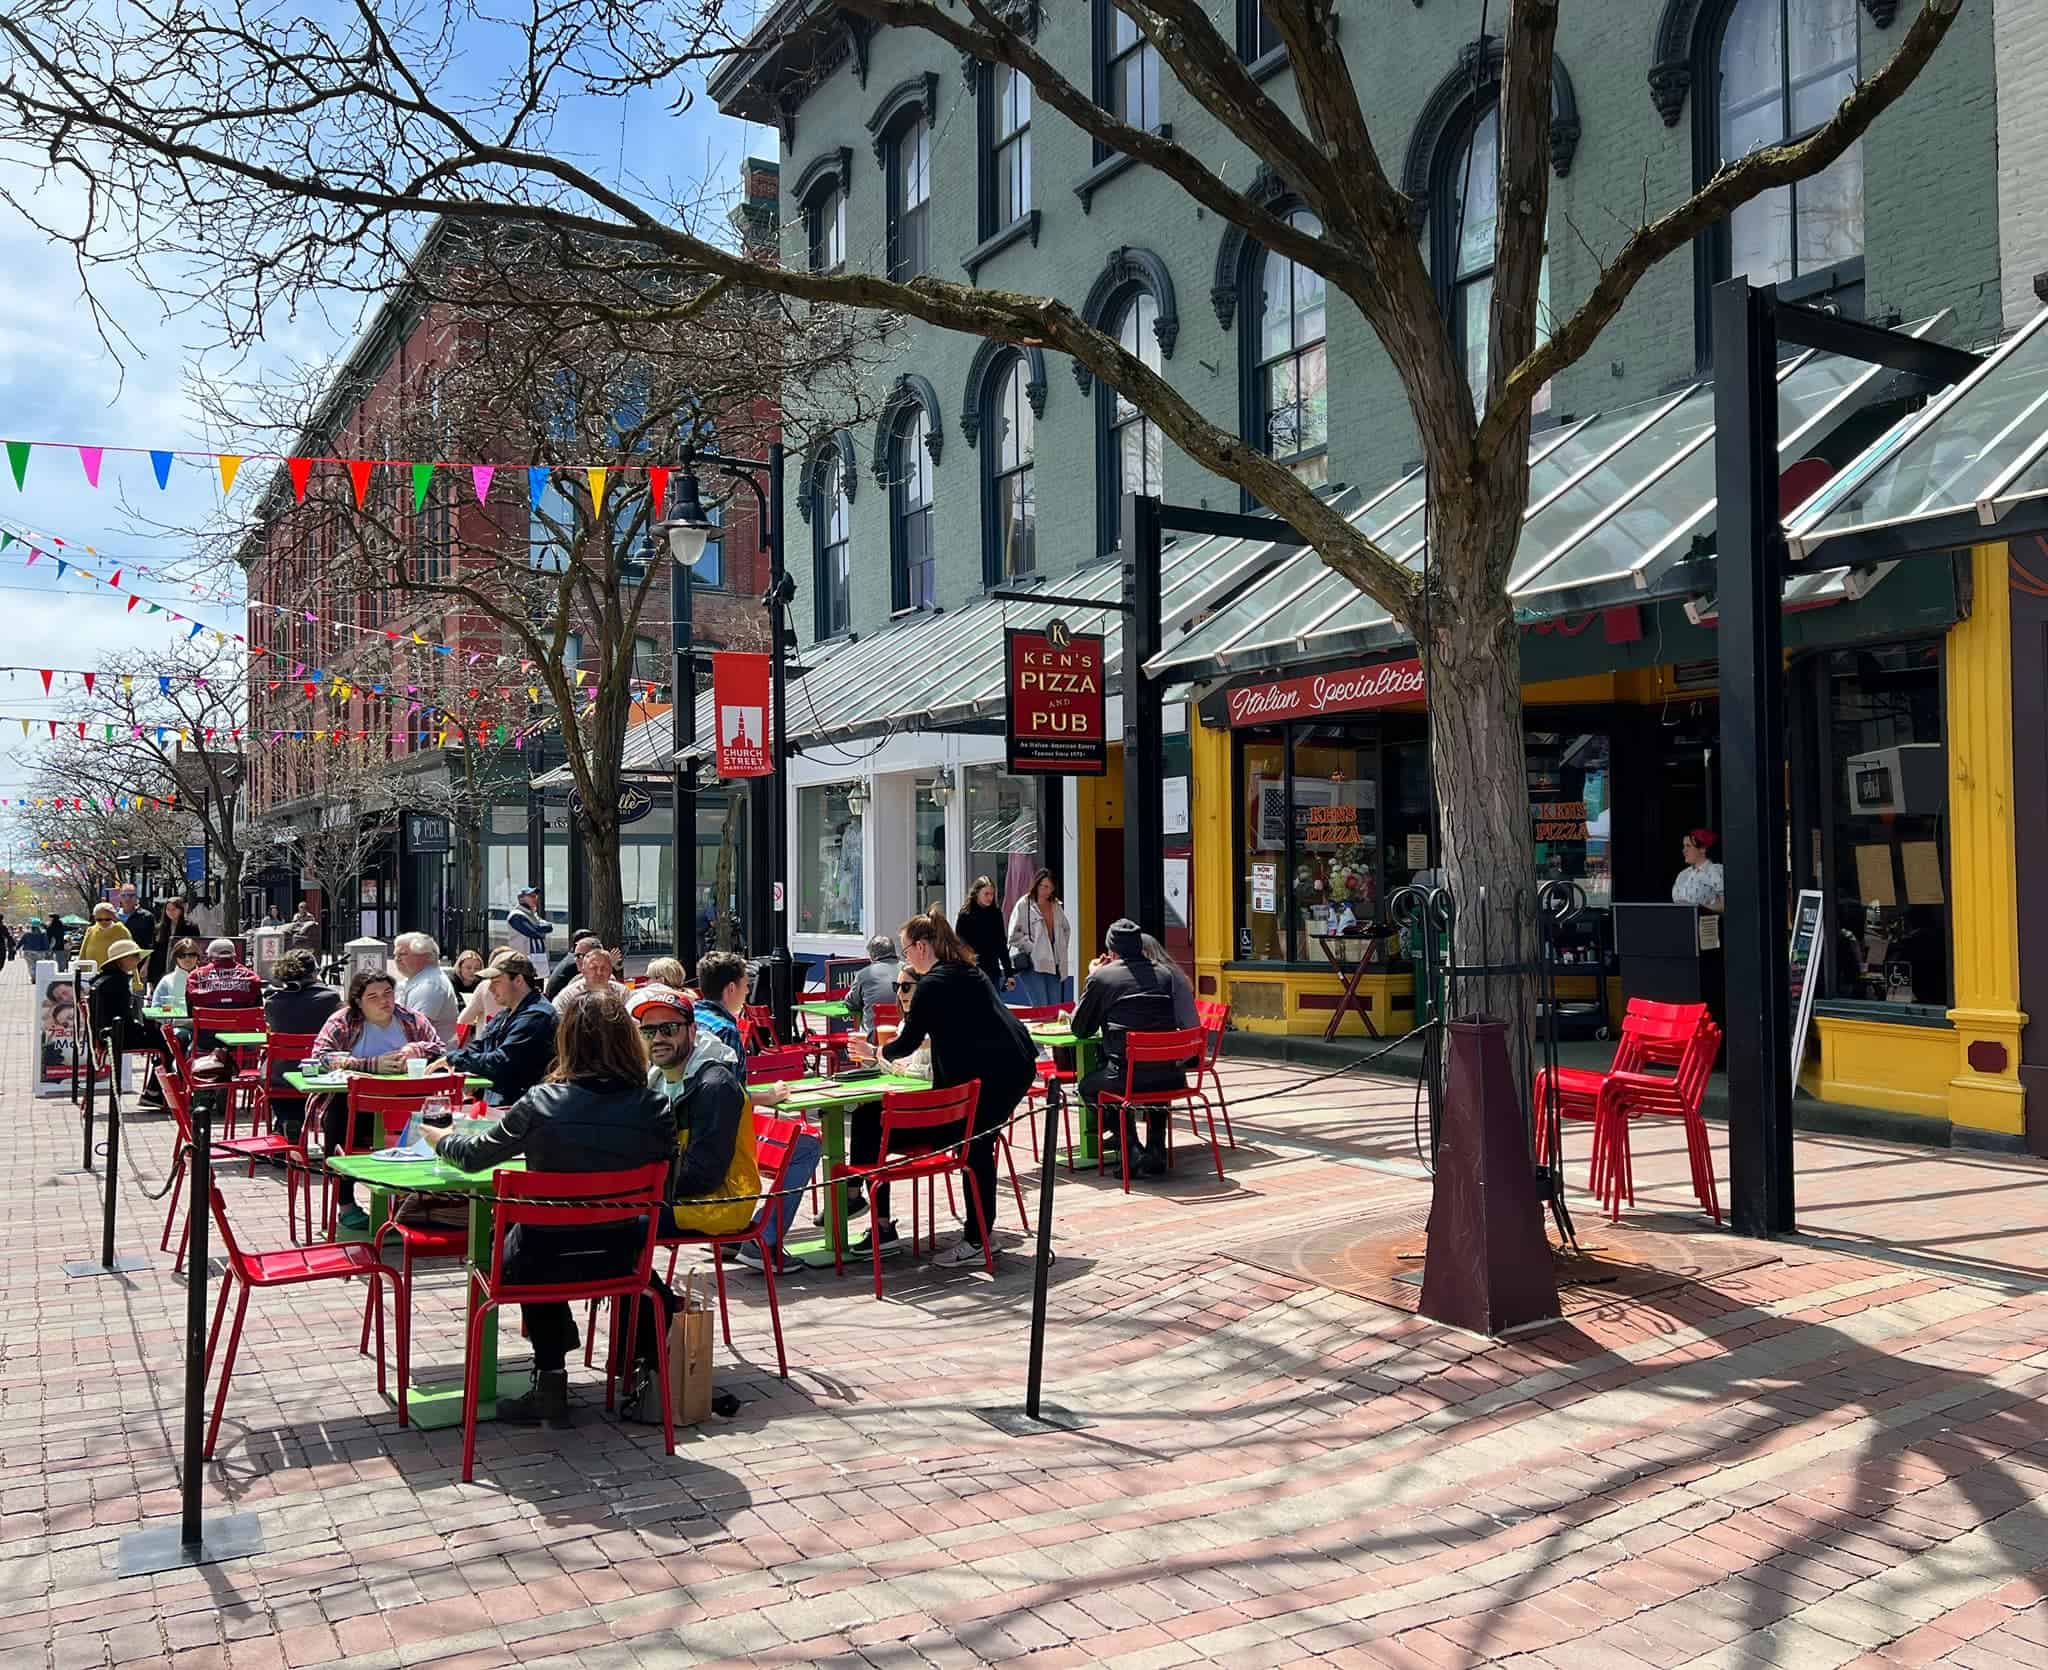 Ken's Pizza and Pub - Outdoor Dining at Church Street Marketplace